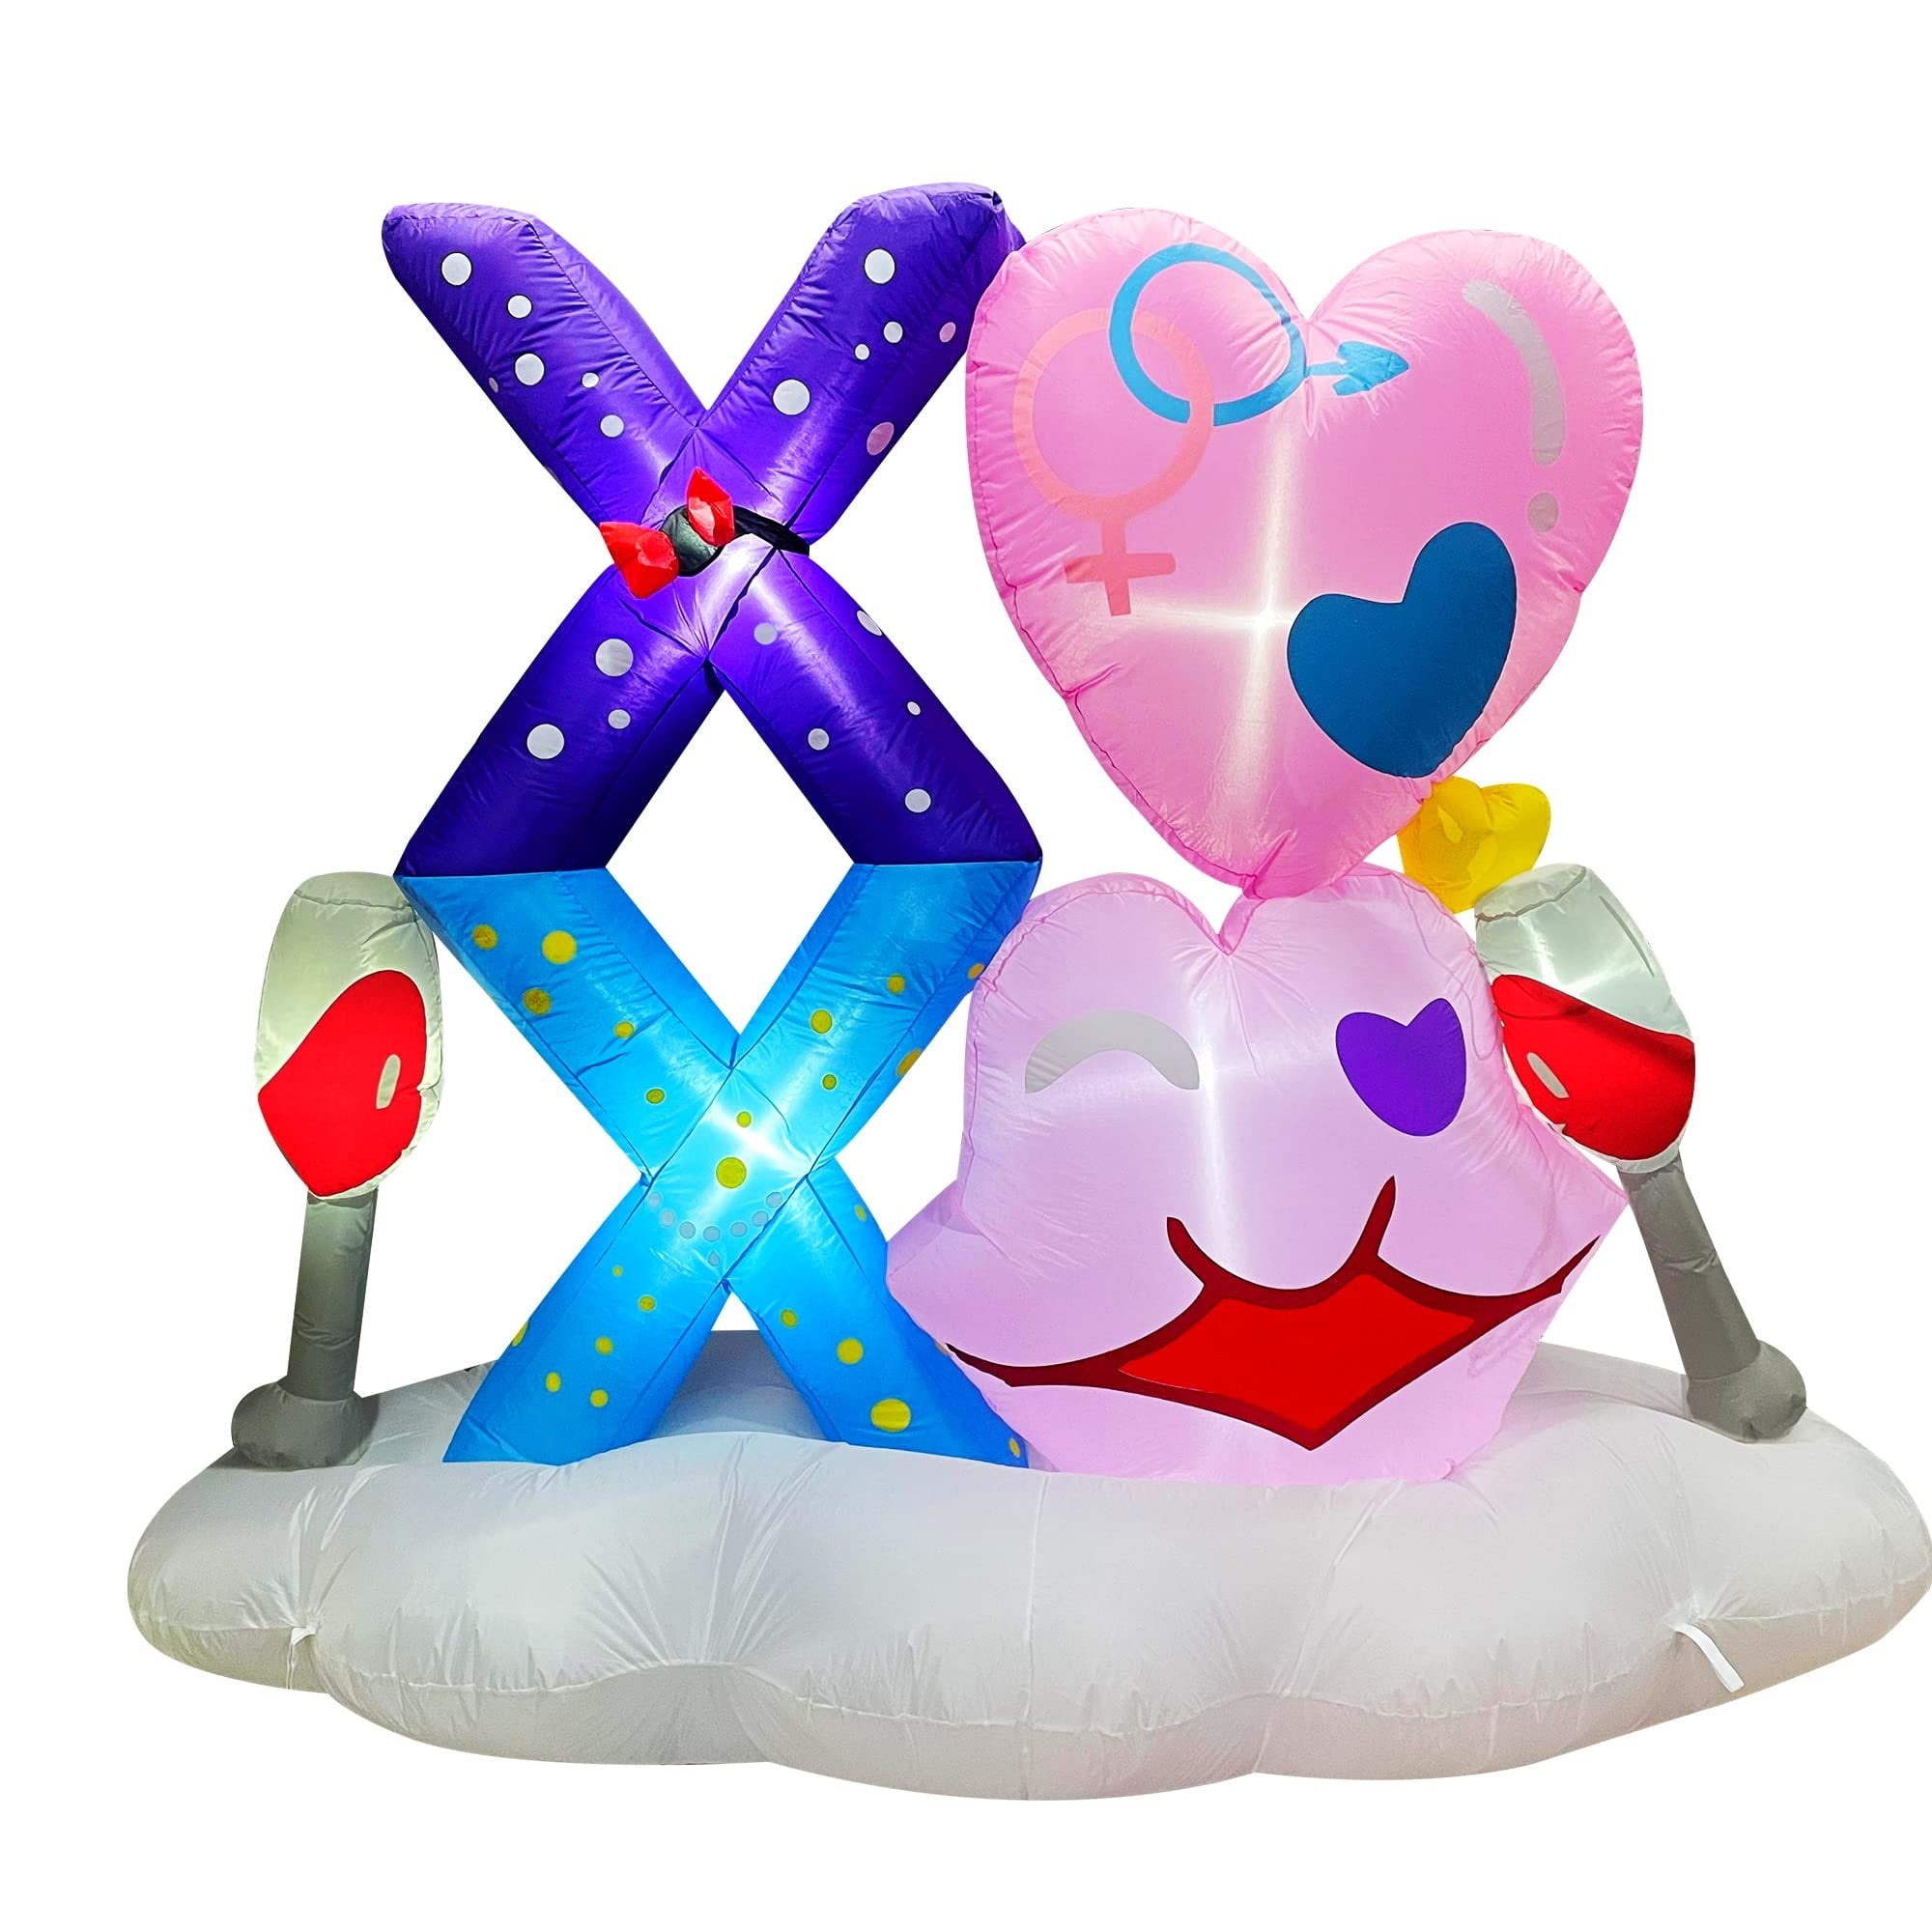 SEASONBLOW 6 Ft Inflatable Valentine Day Sweet Heart Decoration for Wedding Anniversary Party Indoor Outdoor